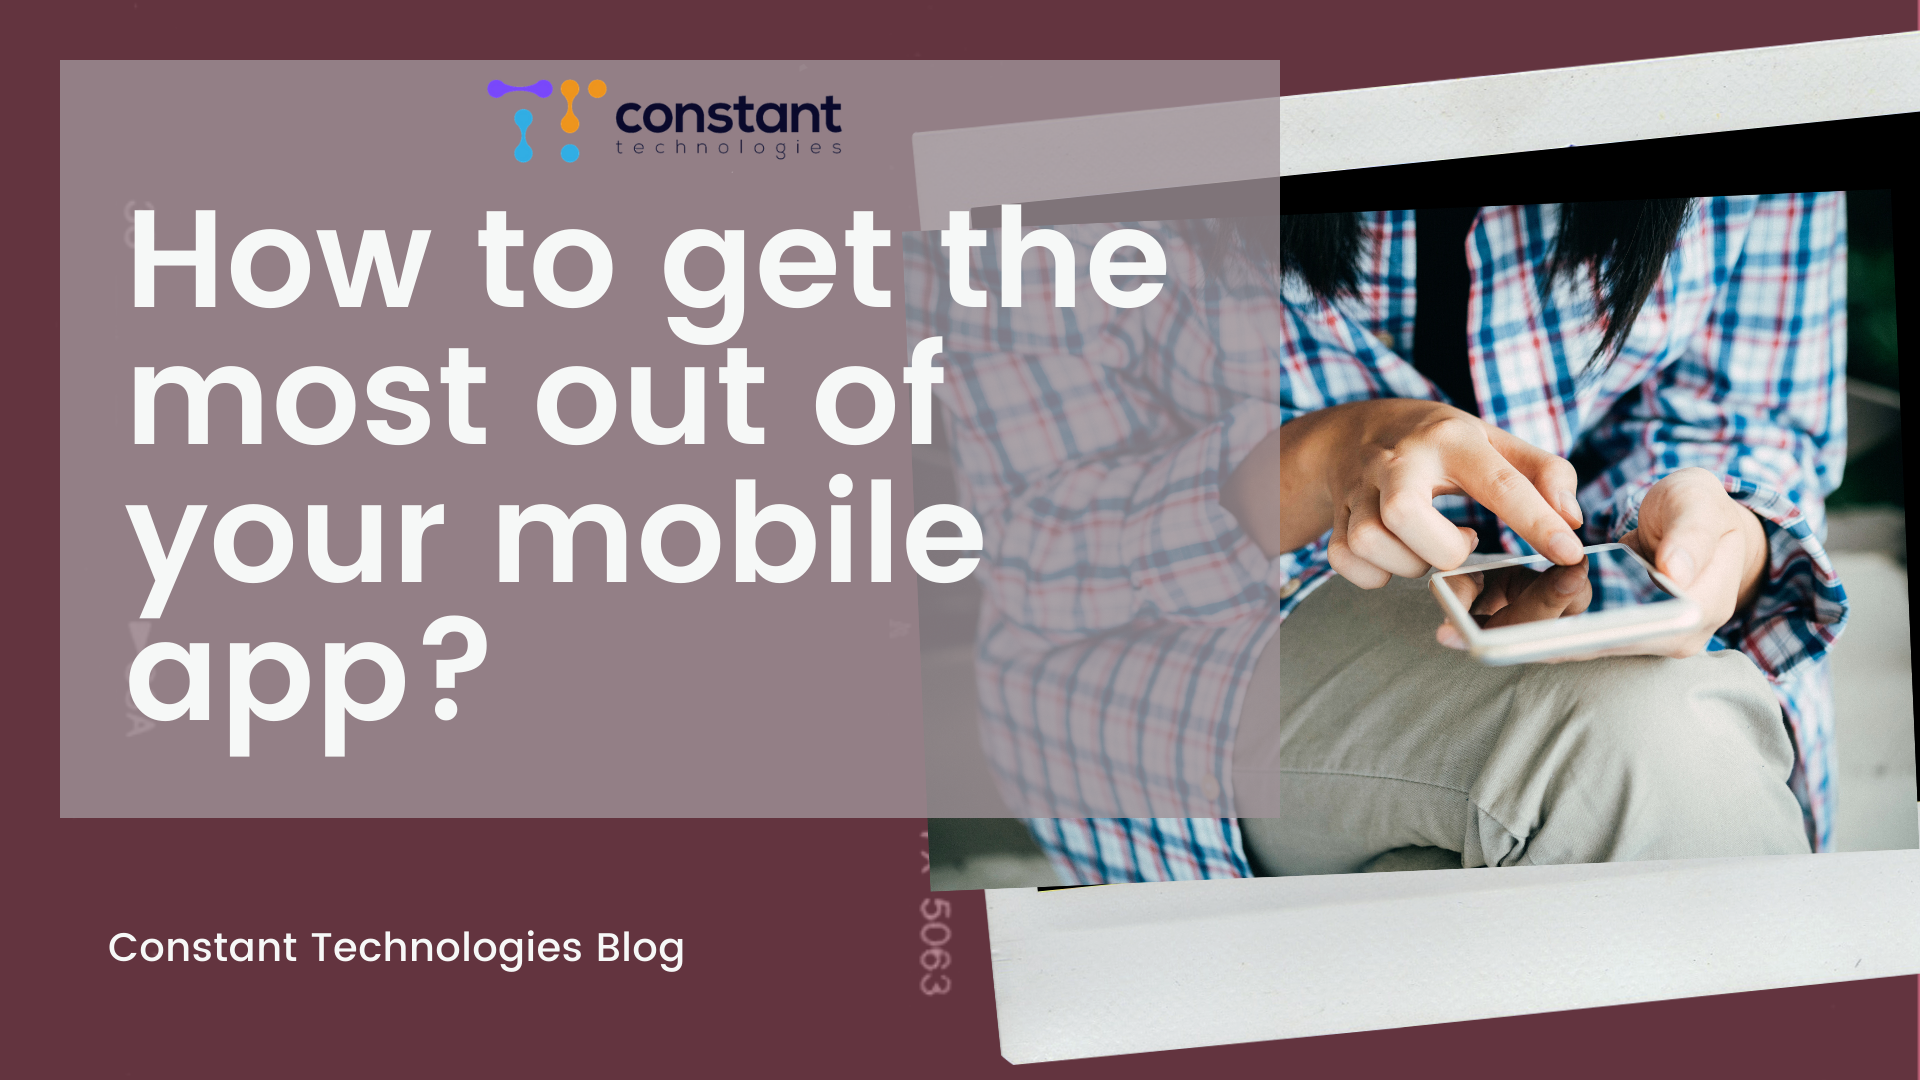 "How to get most out of your mobile app"